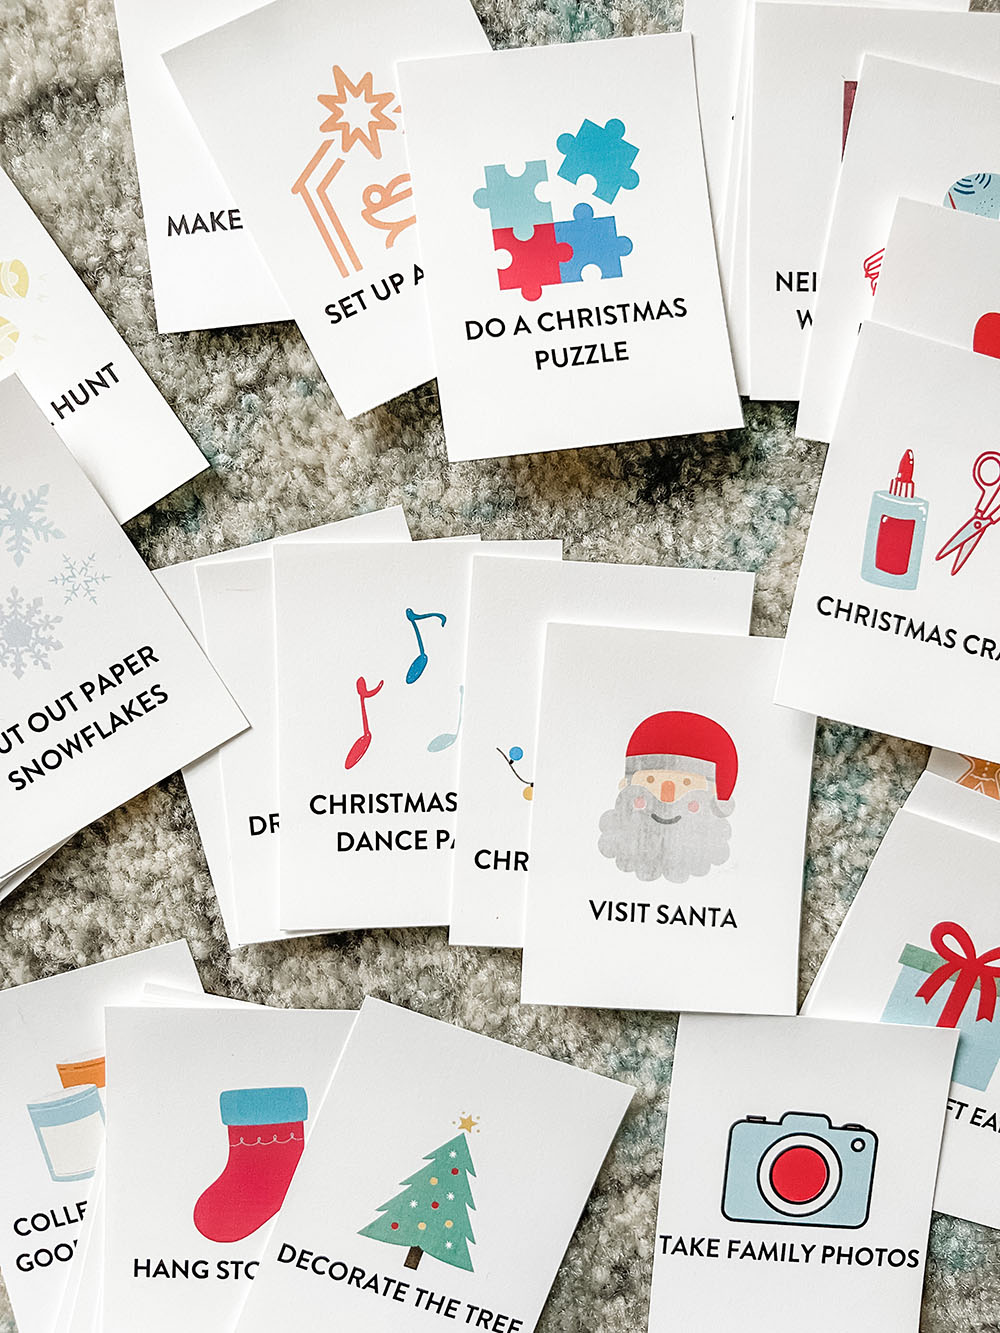 Printable advent calendar cards that are perfect for families such as "do a Christmas puzzle", "visit Santa", "Christmas music dance party", "make a Christmas craft" and more.